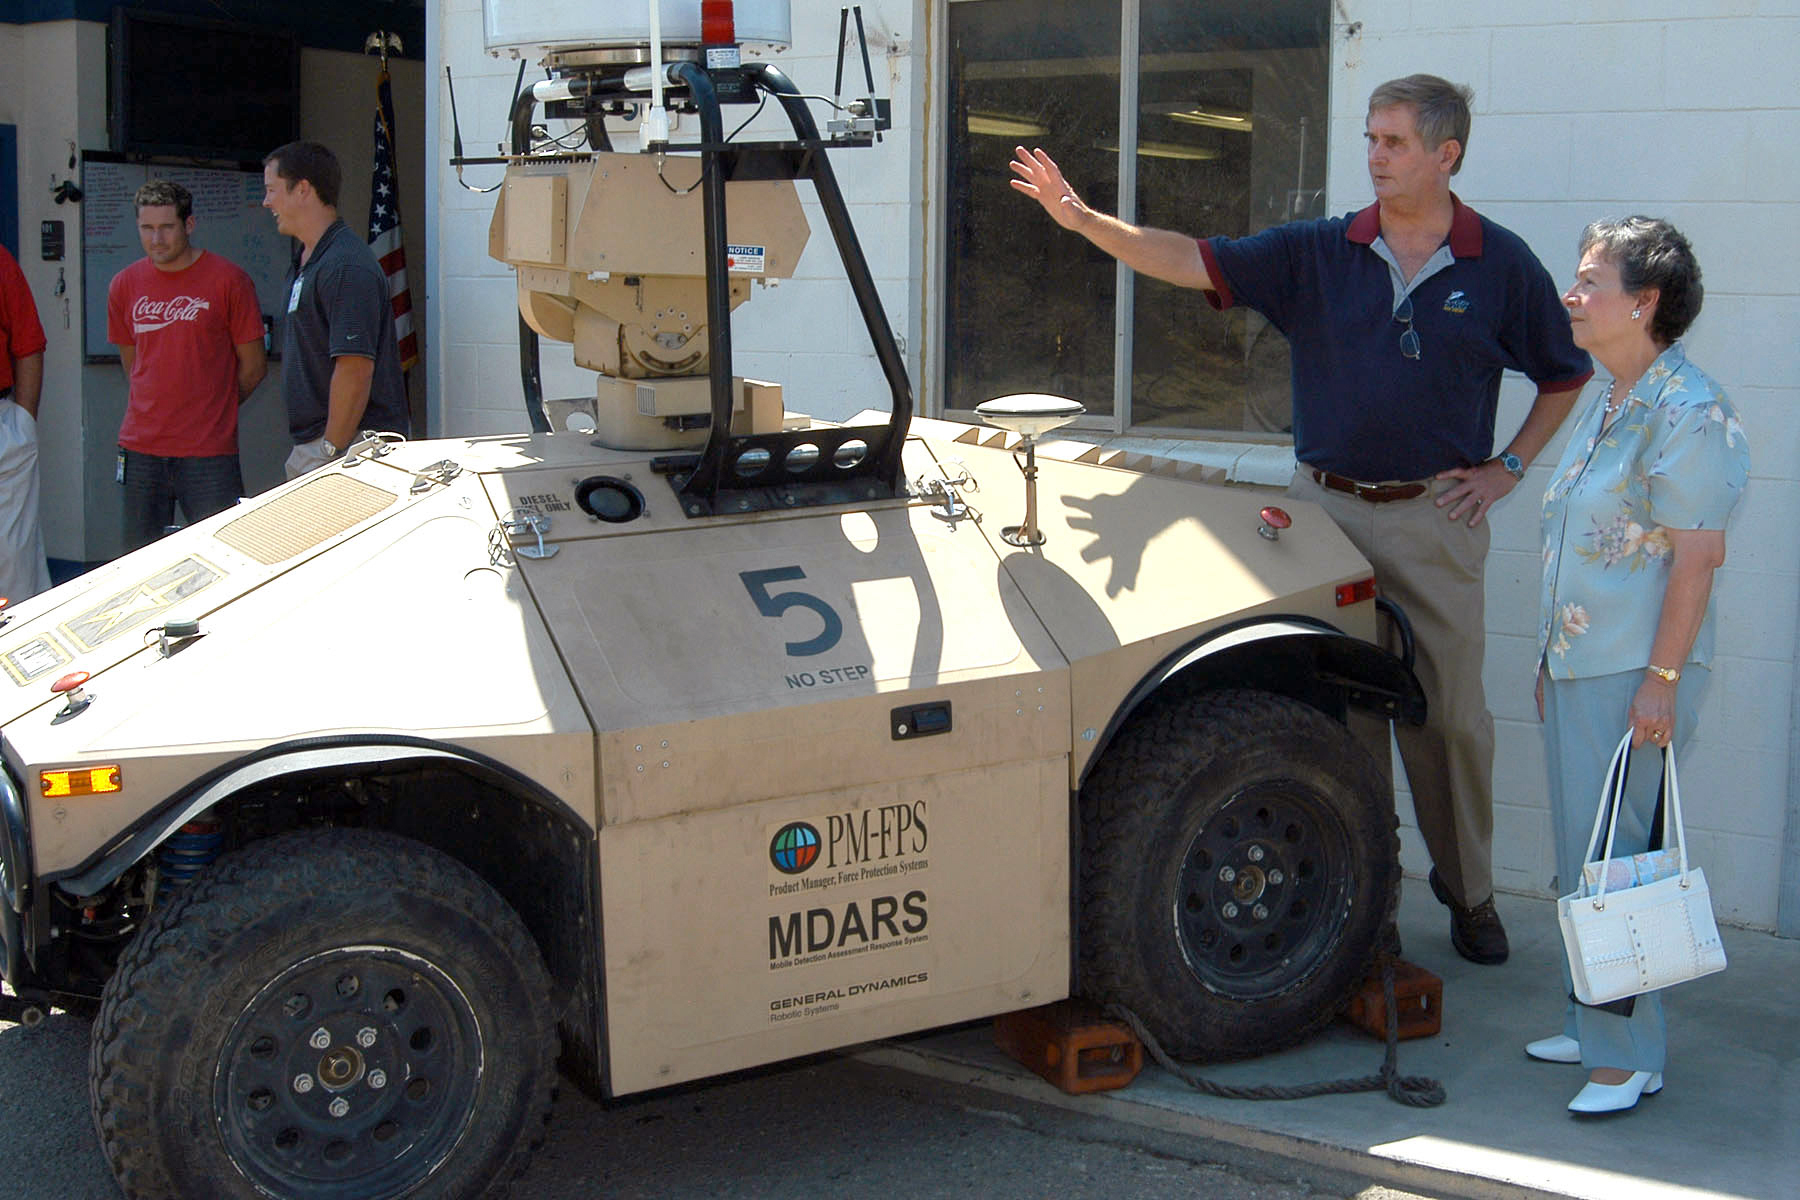 US_Navy_070904-N-1111M-001_Robotics_engineer_Bart_Everett_explains_the_Mobile_Detection_Assessment_and_Response_System_%28MDARS%29_to_Judy_Merry%2C_widow_of_World_War_II_robotics_pioneer_Robert_Merry%2C_at_Space_and_Naval_Warfare_Syste.jpg